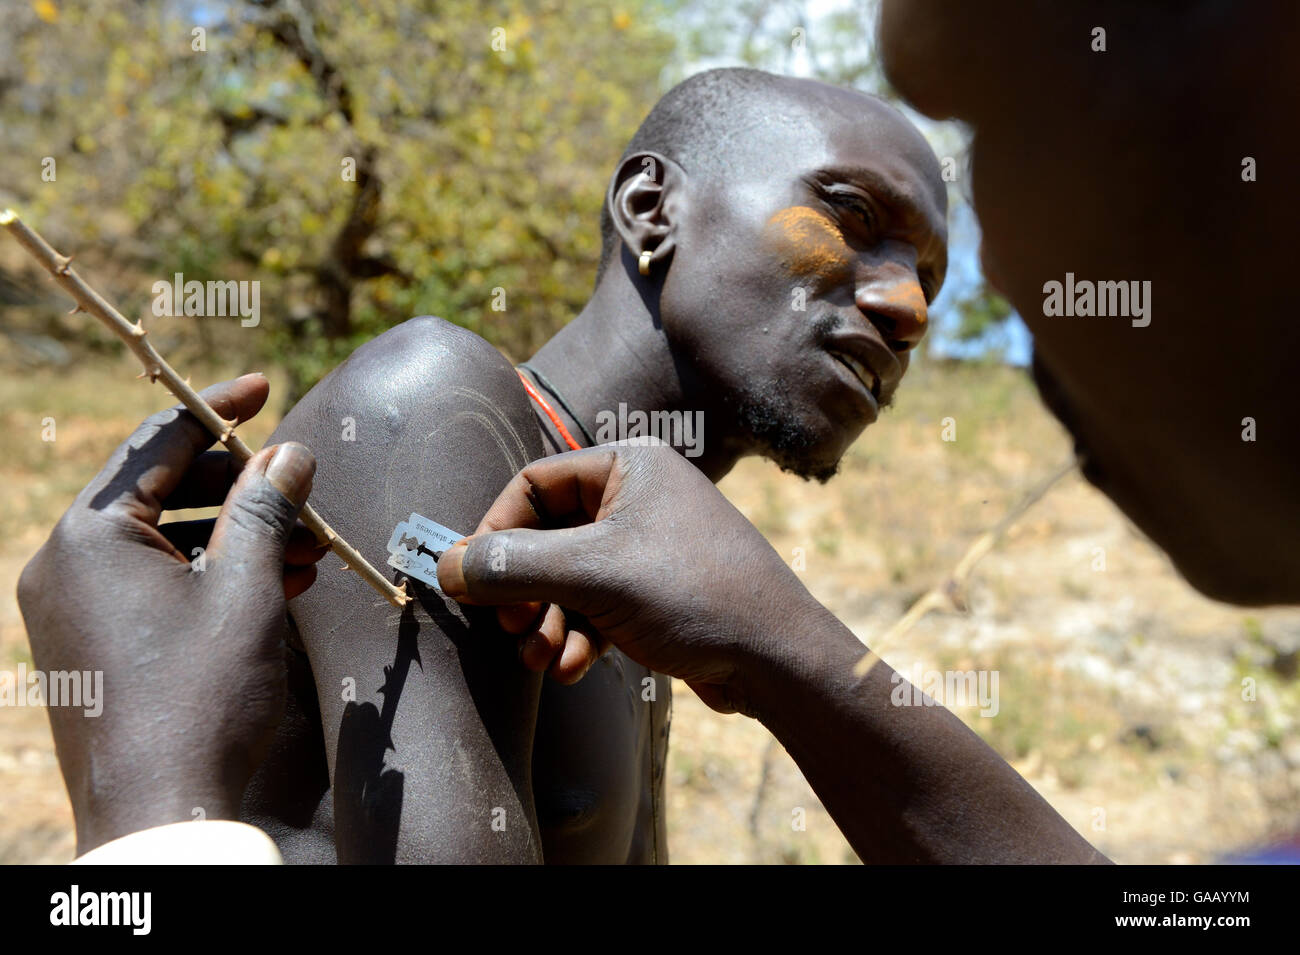 Men from the Mursi tribe decoratively scaring skin, one man scars the arm of another one by lifting the skin with an acacia spine and cutting it with a razor blade, Ethiopia, March 2015. Stock Photo